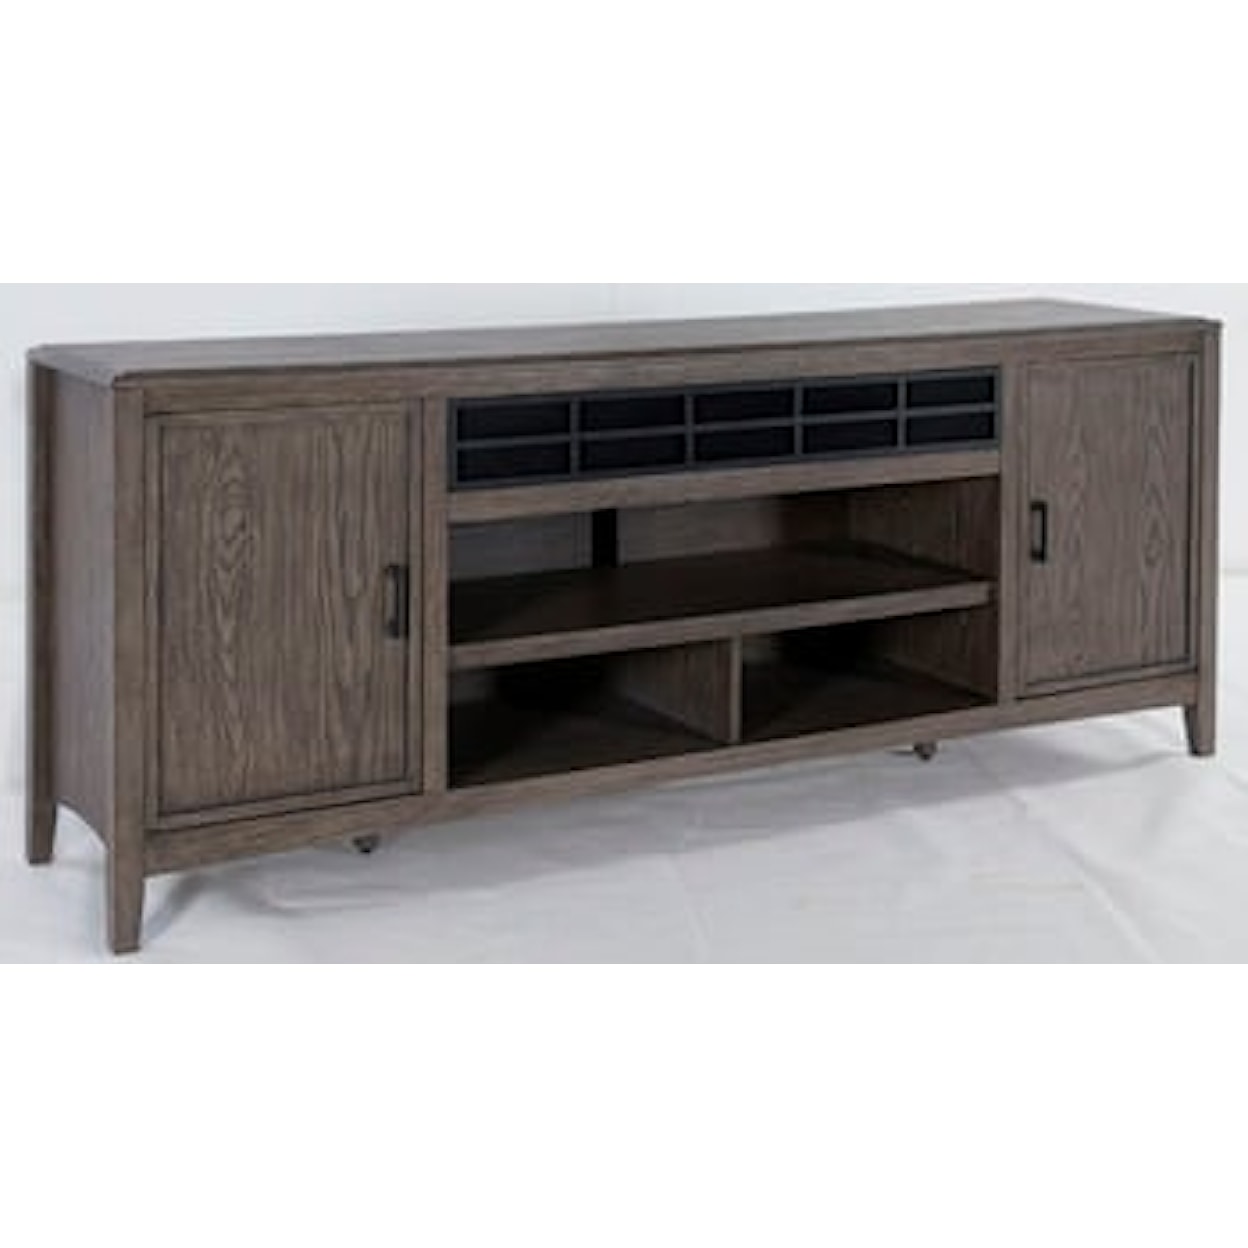 Signature Design by Ashley Montillan XL TV Stand w/Fireplace Option